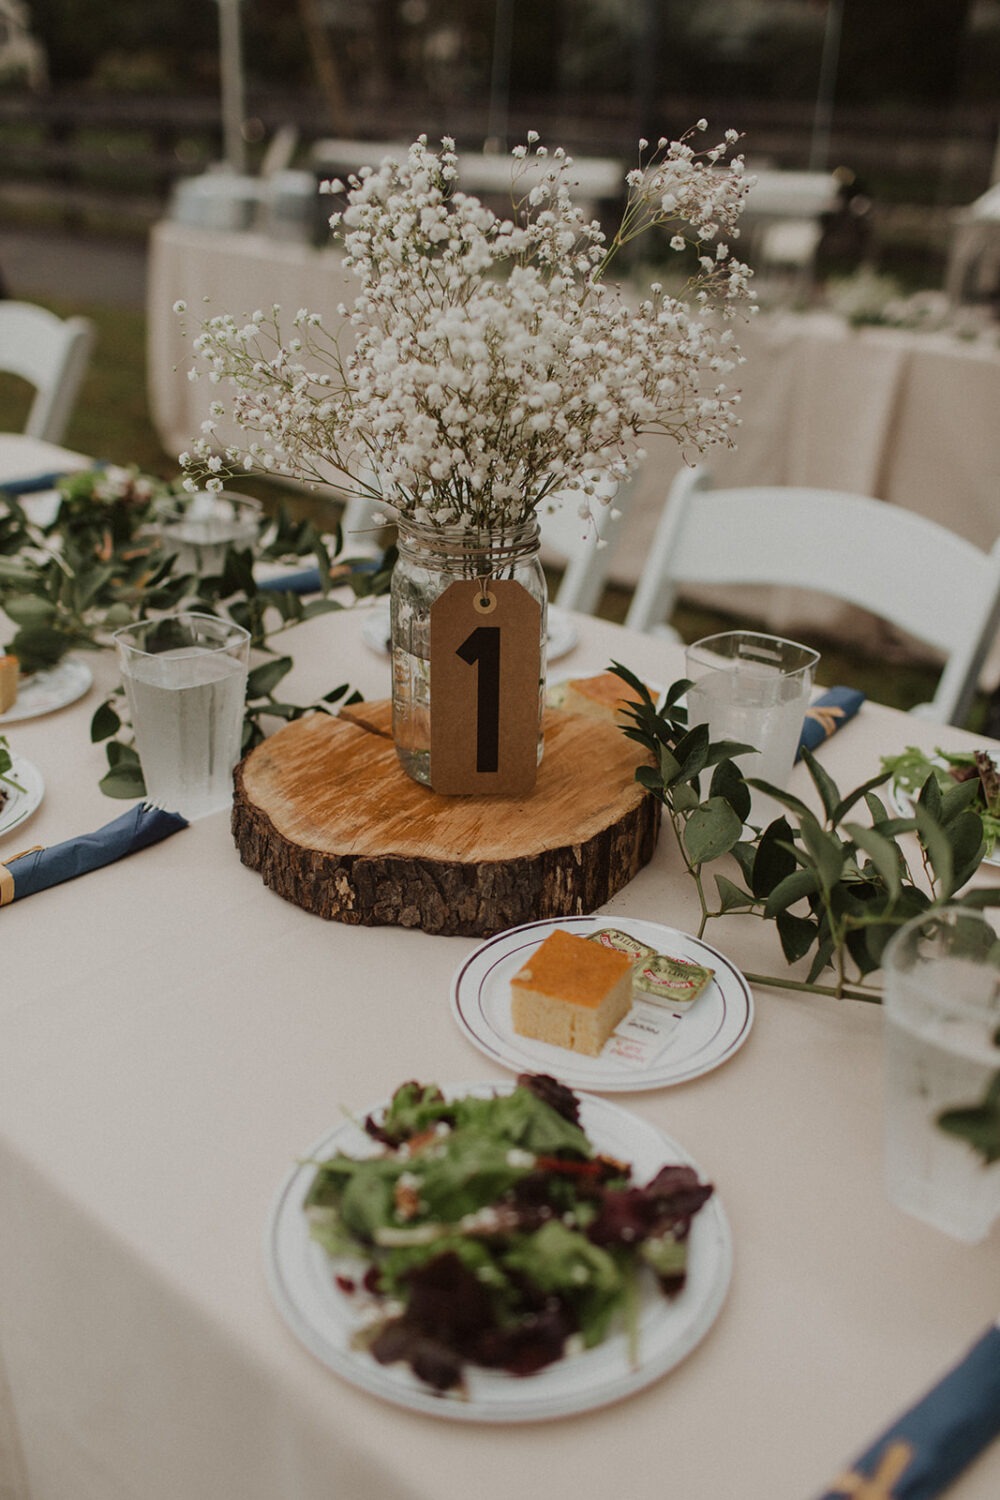 floral and wood table setting at DIY wedding